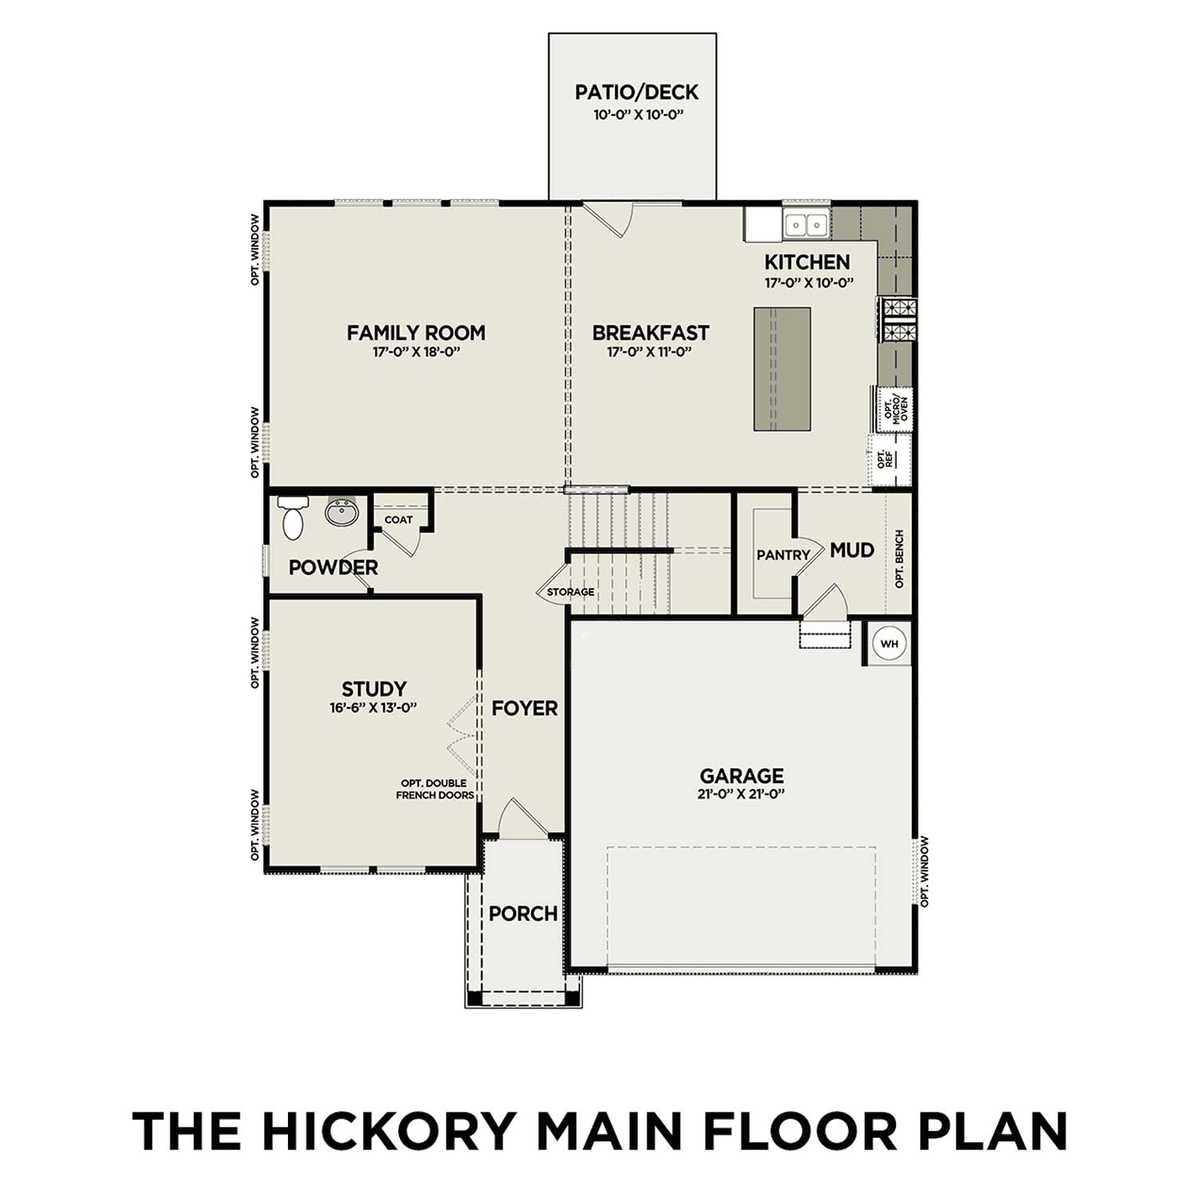 1 - The Hickory A floor plan layout for 3623 Rivermont Way in Davidson Homes' Salem Landing community.